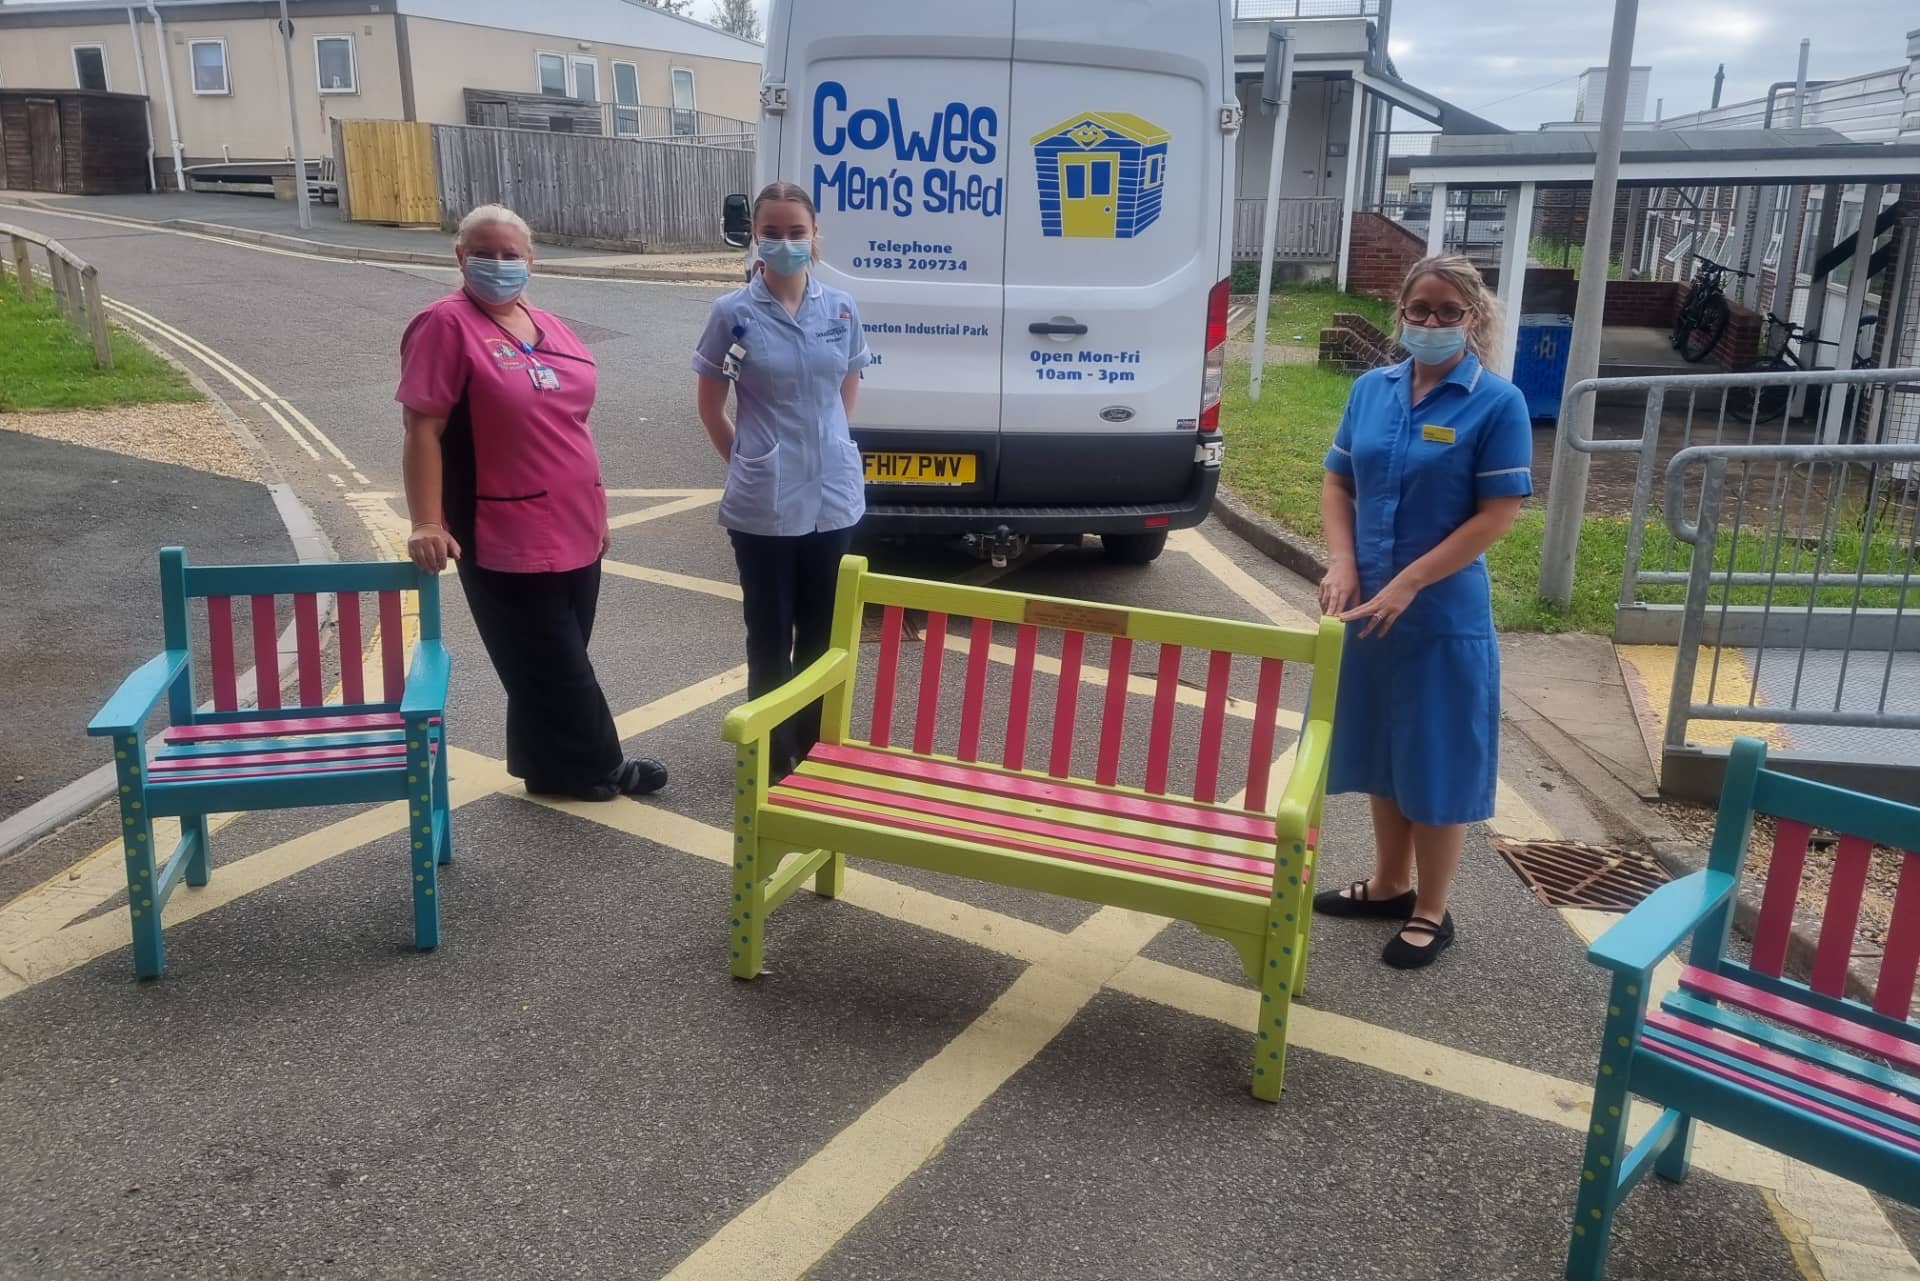 NHS Staff with benches outside hospital